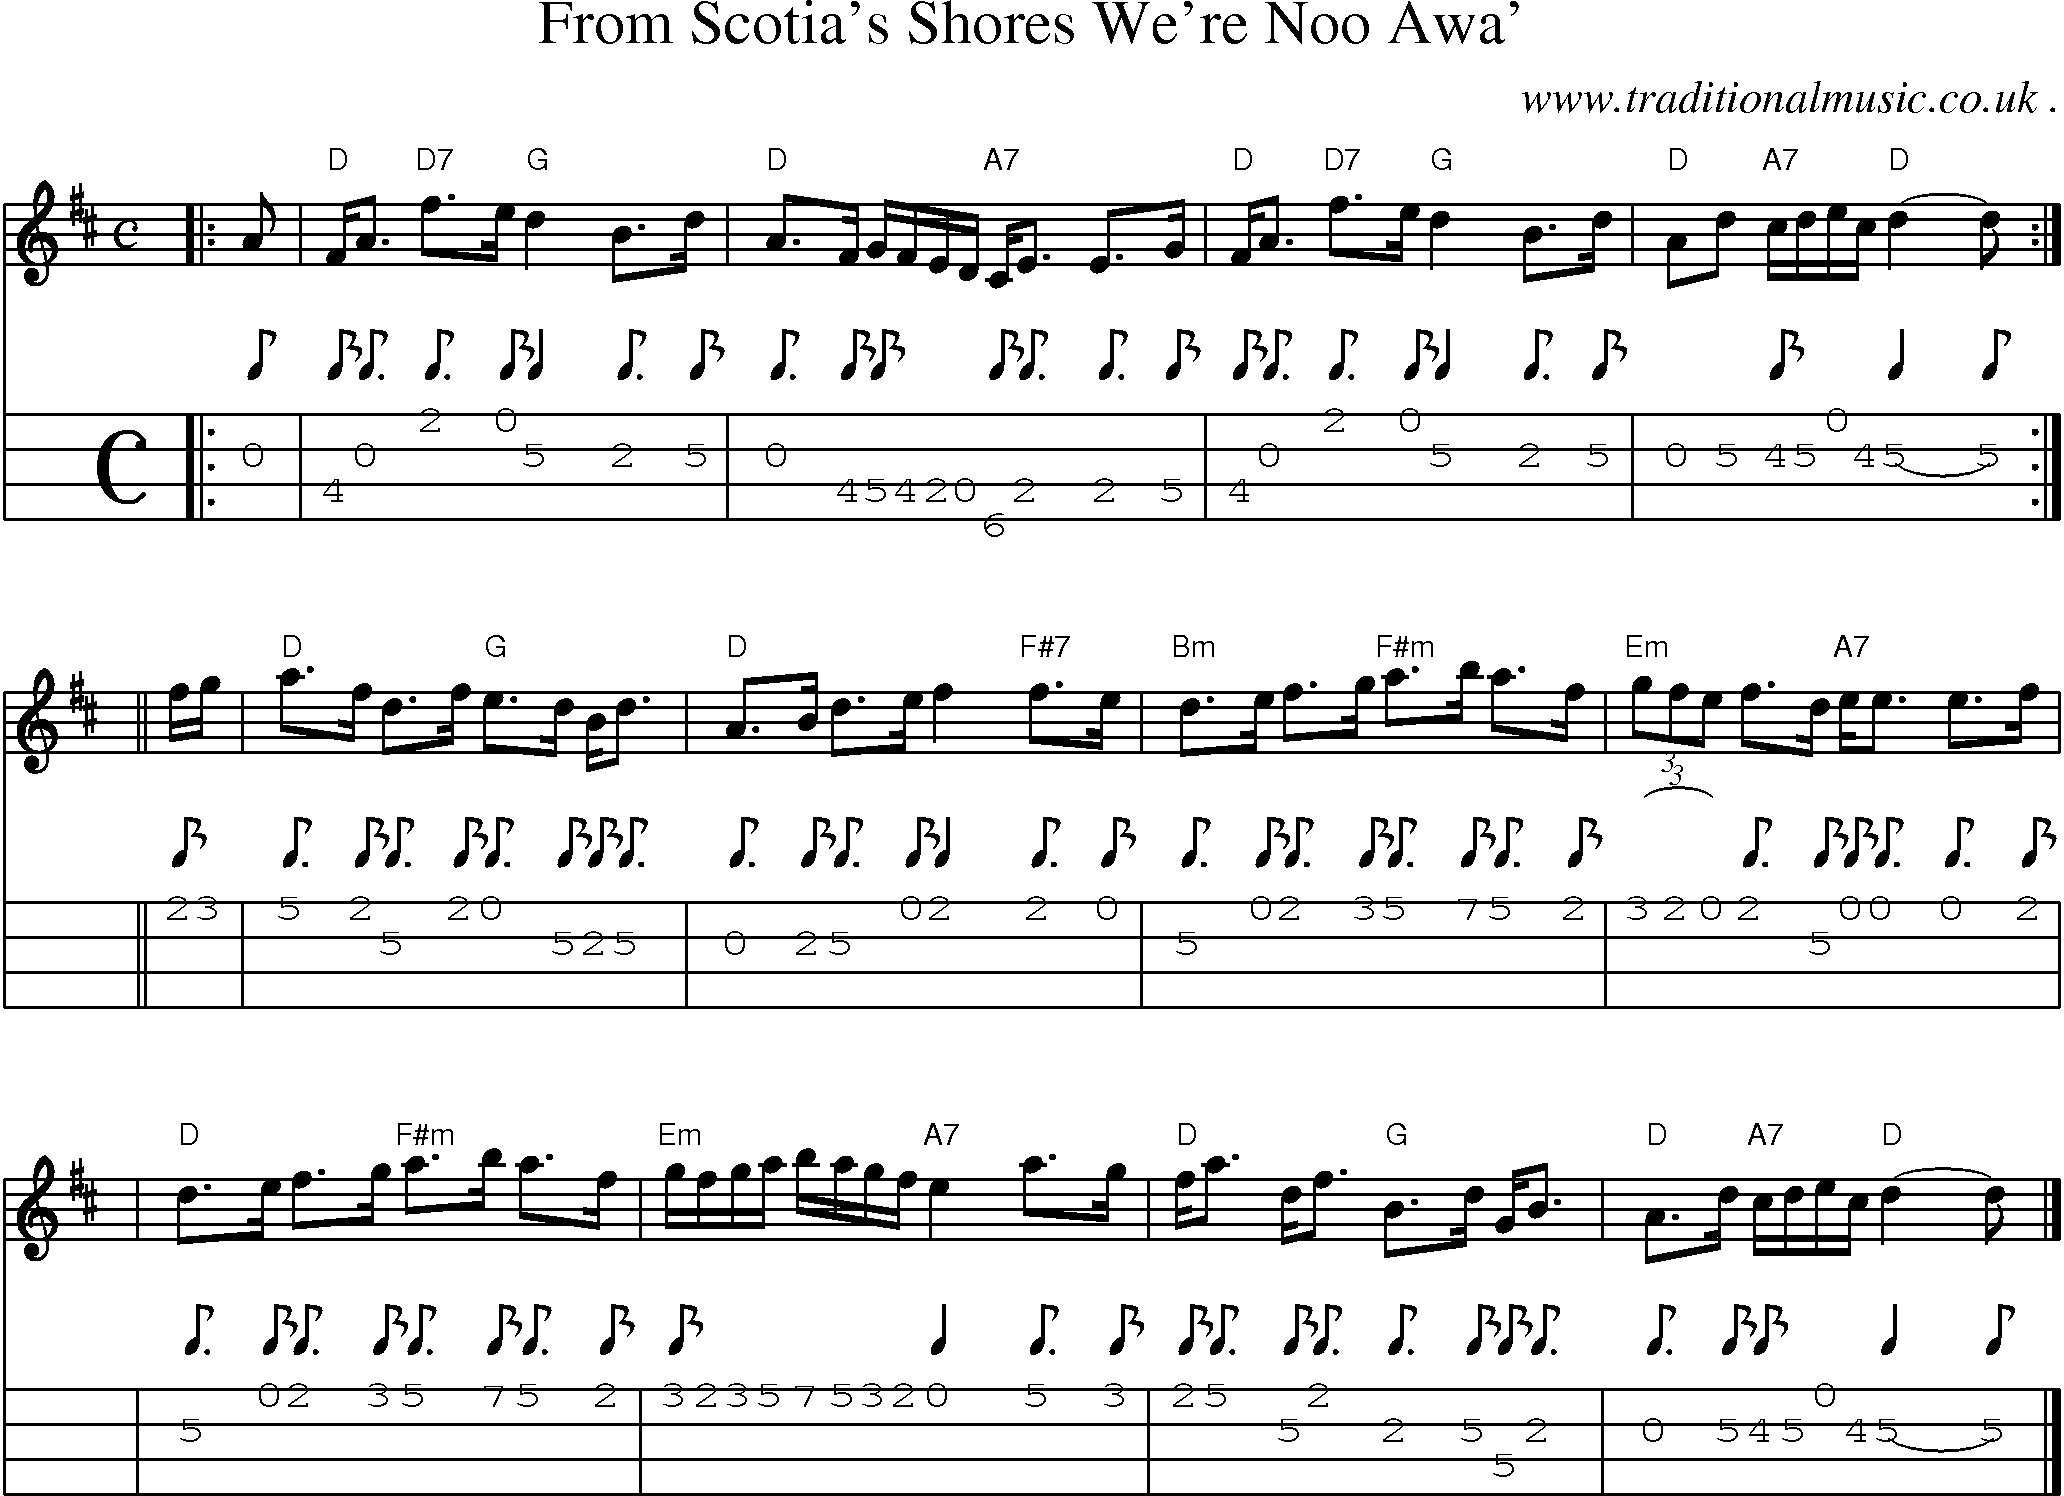 Sheet-music  score, Chords and Mandolin Tabs for From Scotias Shores Were Noo Awa